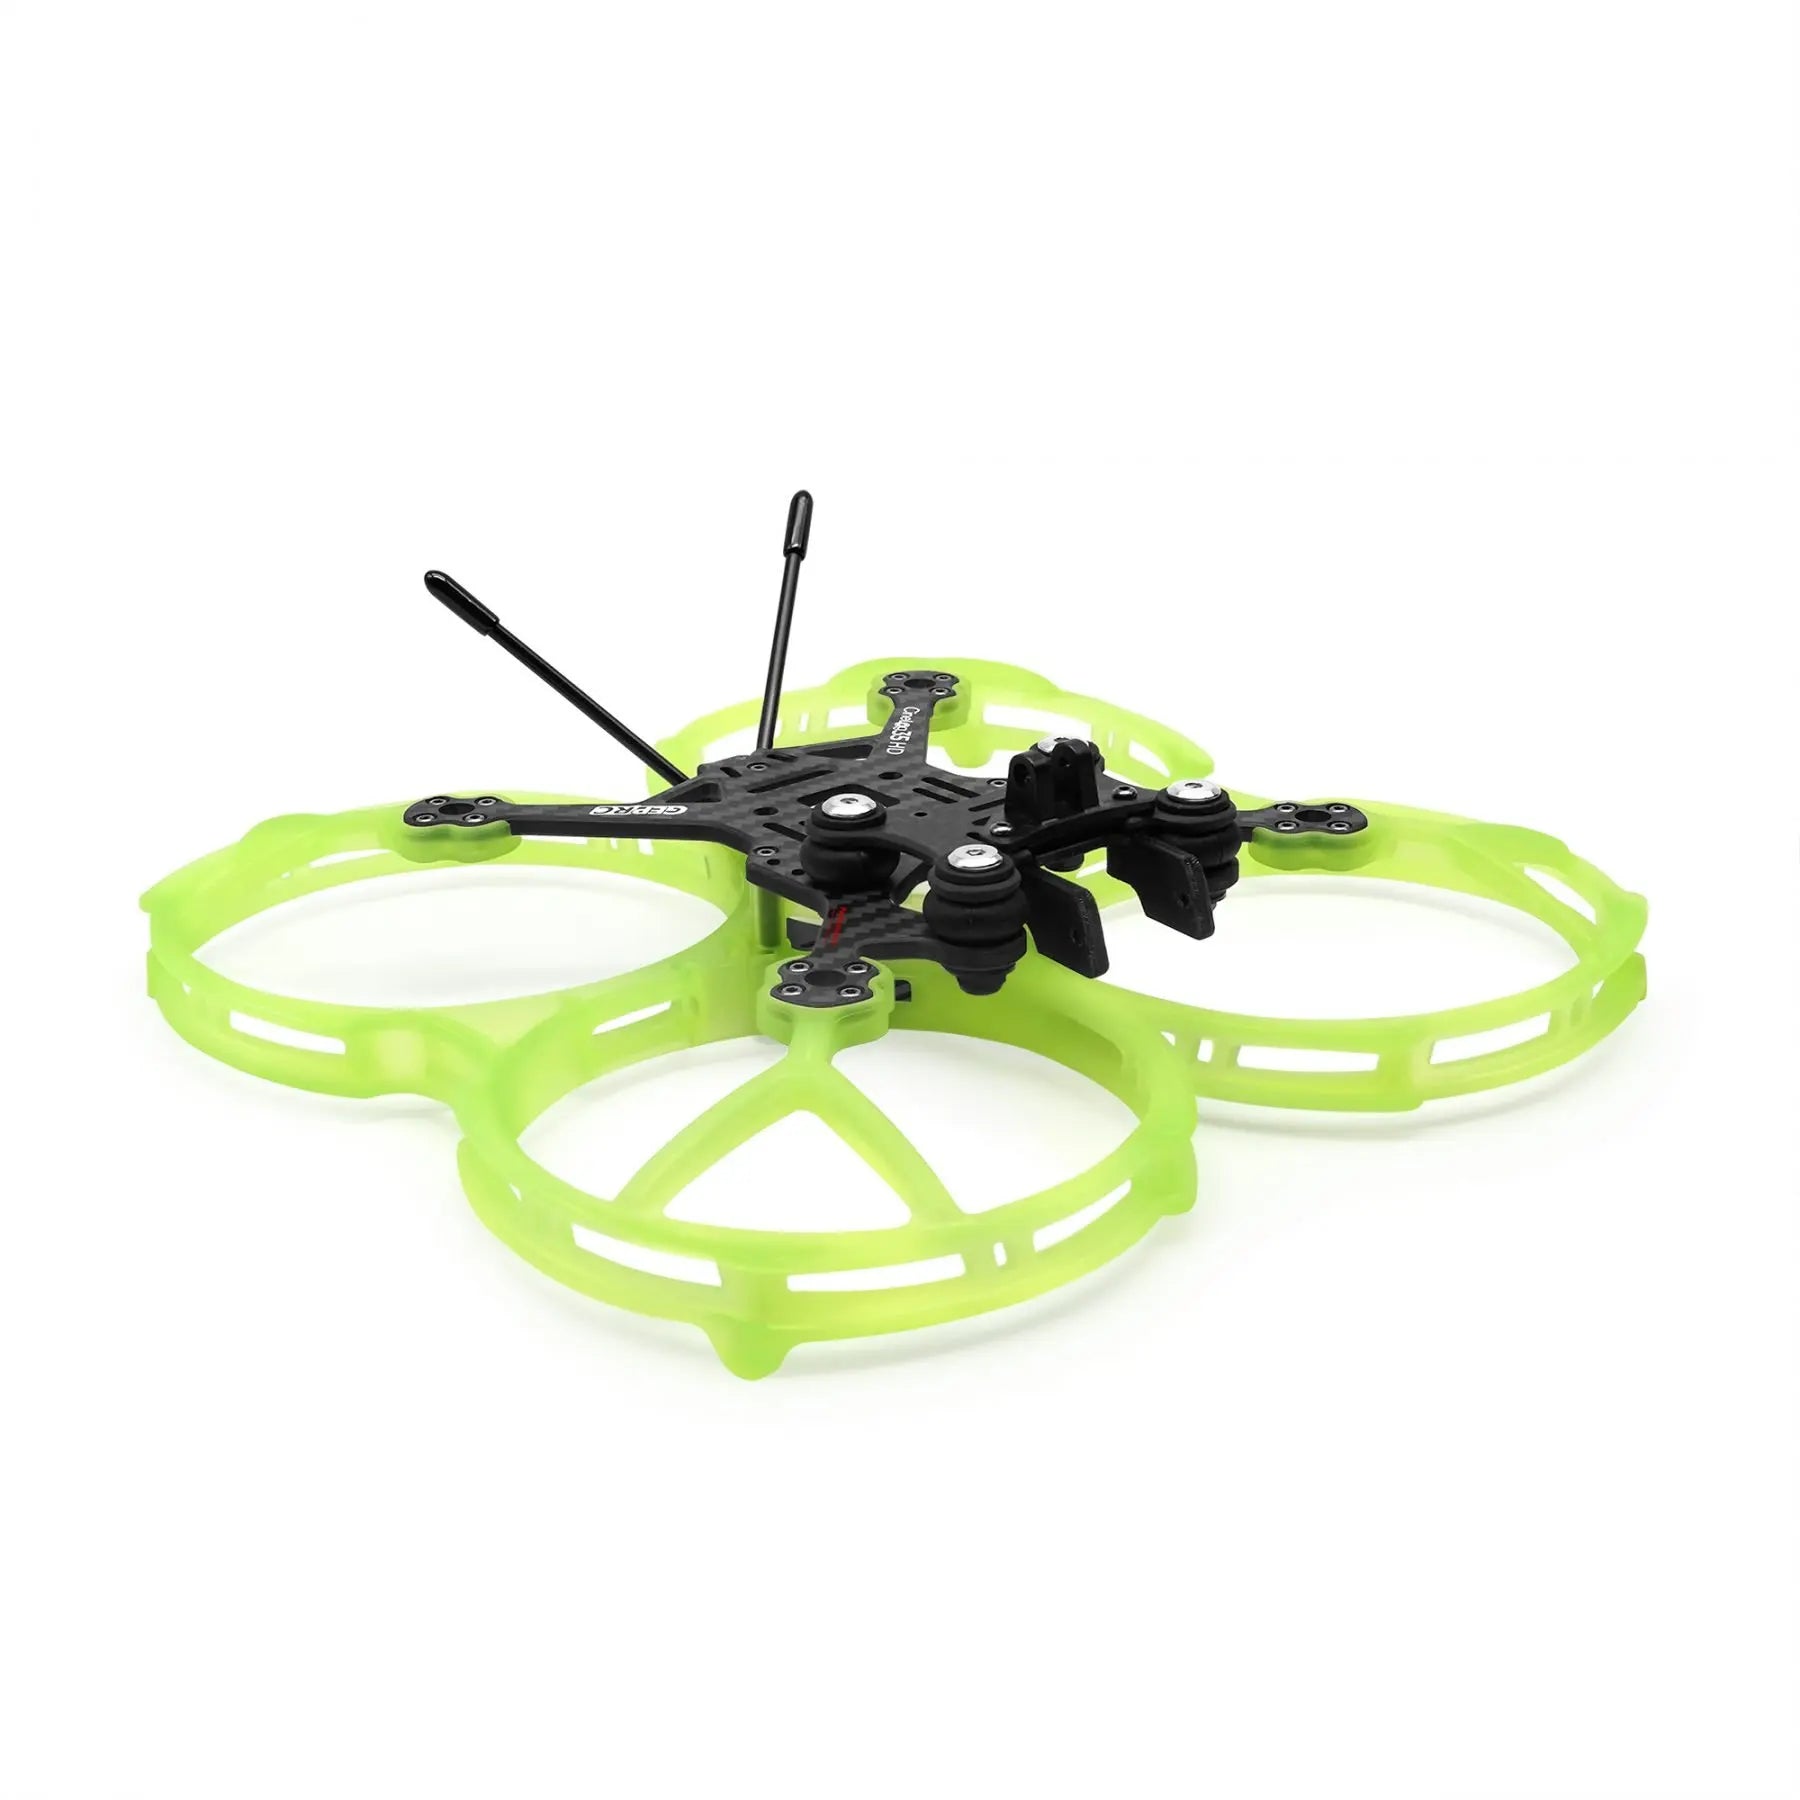 the propeller guard adopts an integrated design, and the overall structure is more solid